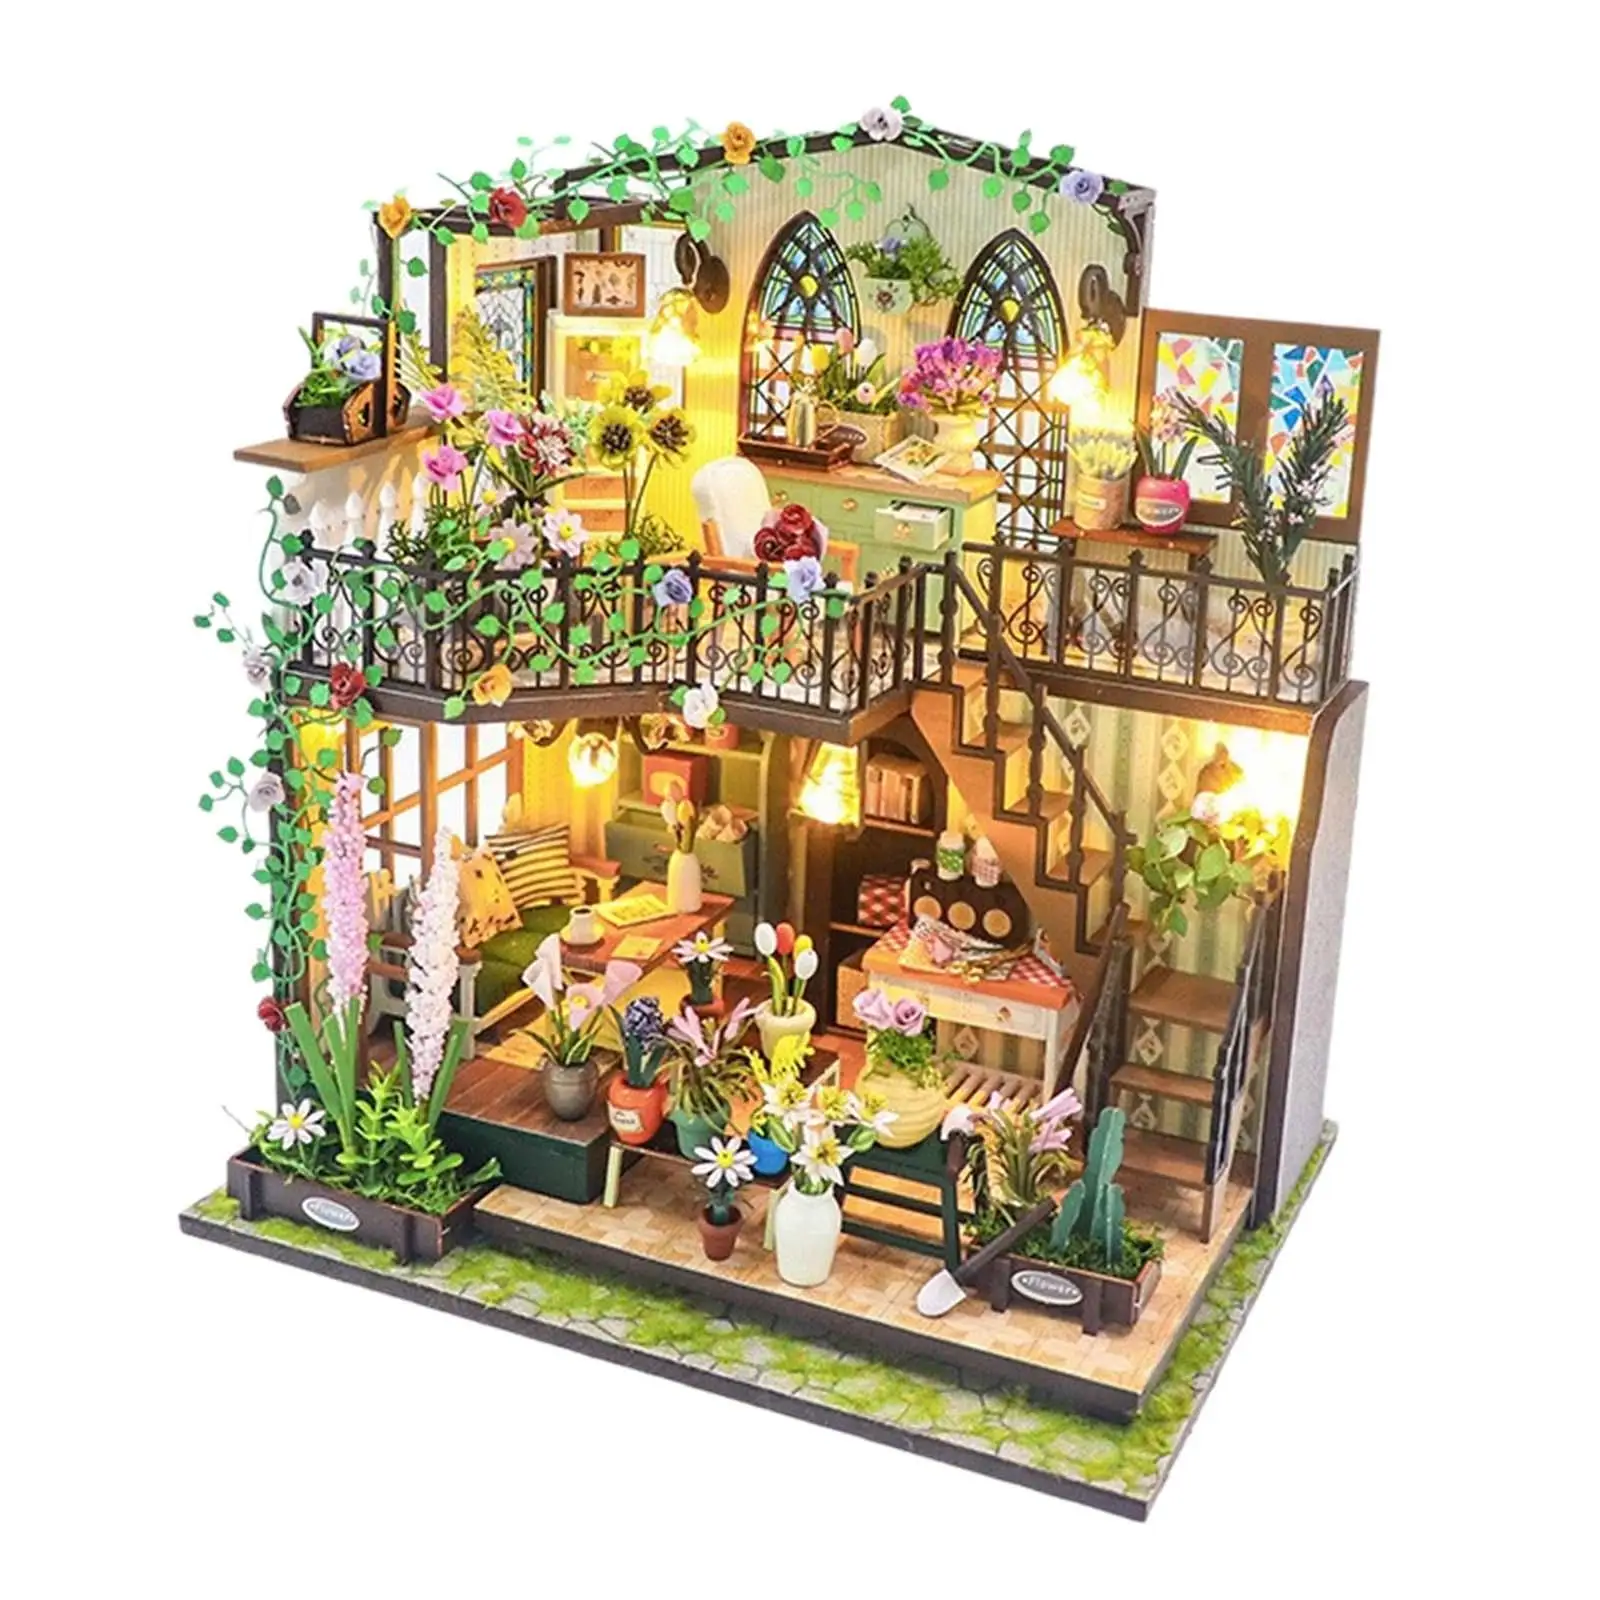 

DIY Wooden Miniature Dollhouse Creative Woodcrafts Toys Tiny Building Kits Mini House Model for Birthday Gift Adults Boys Girls